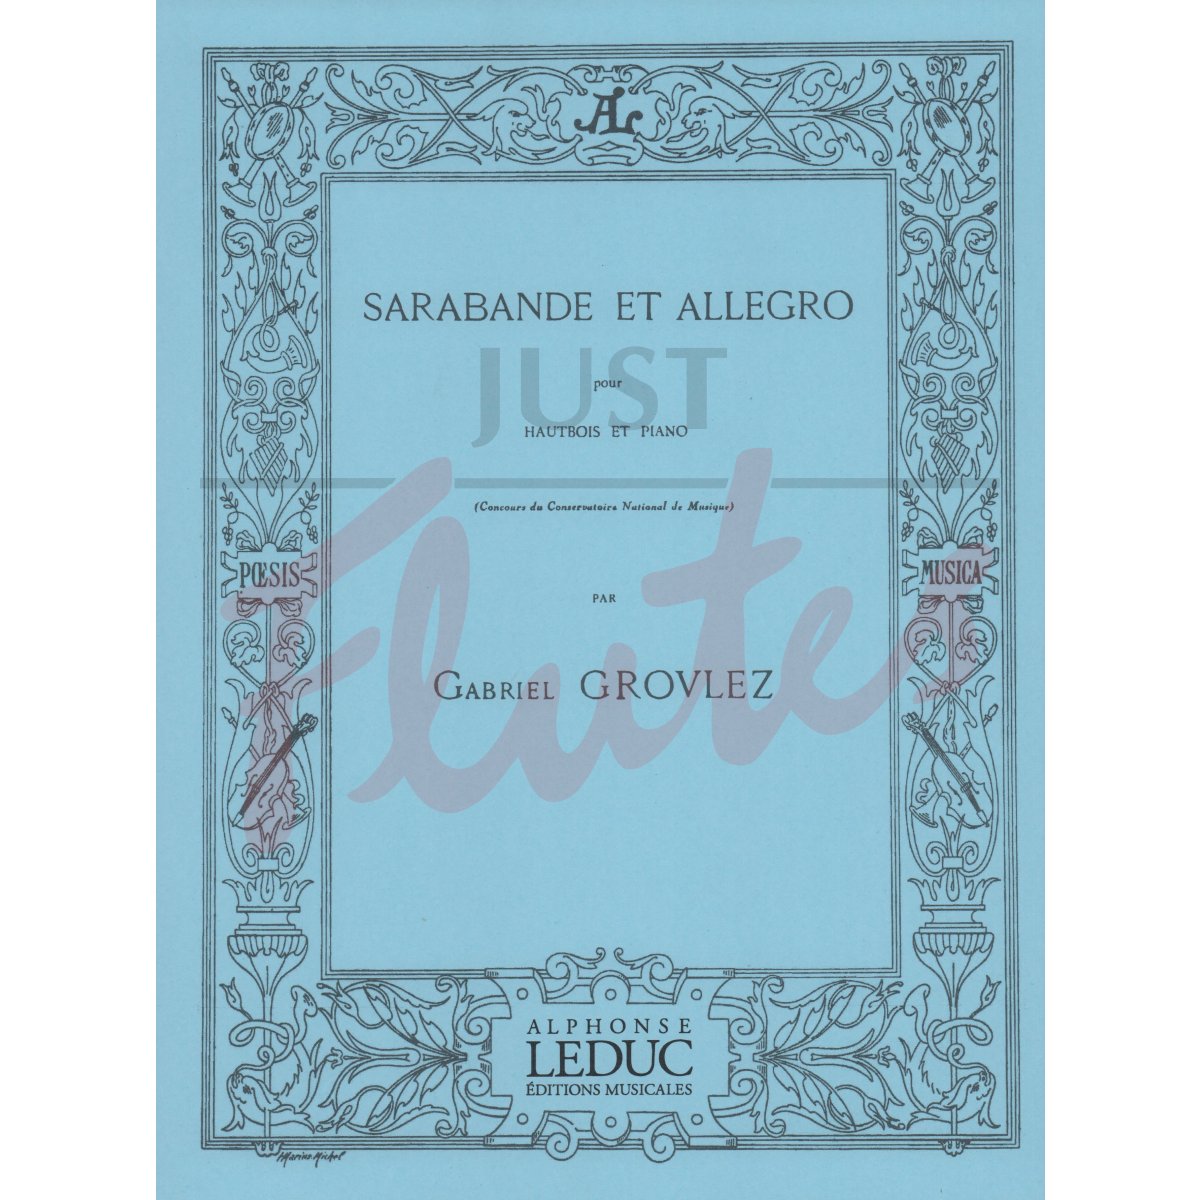 Sarabande et Allegro for Oboe and Piano